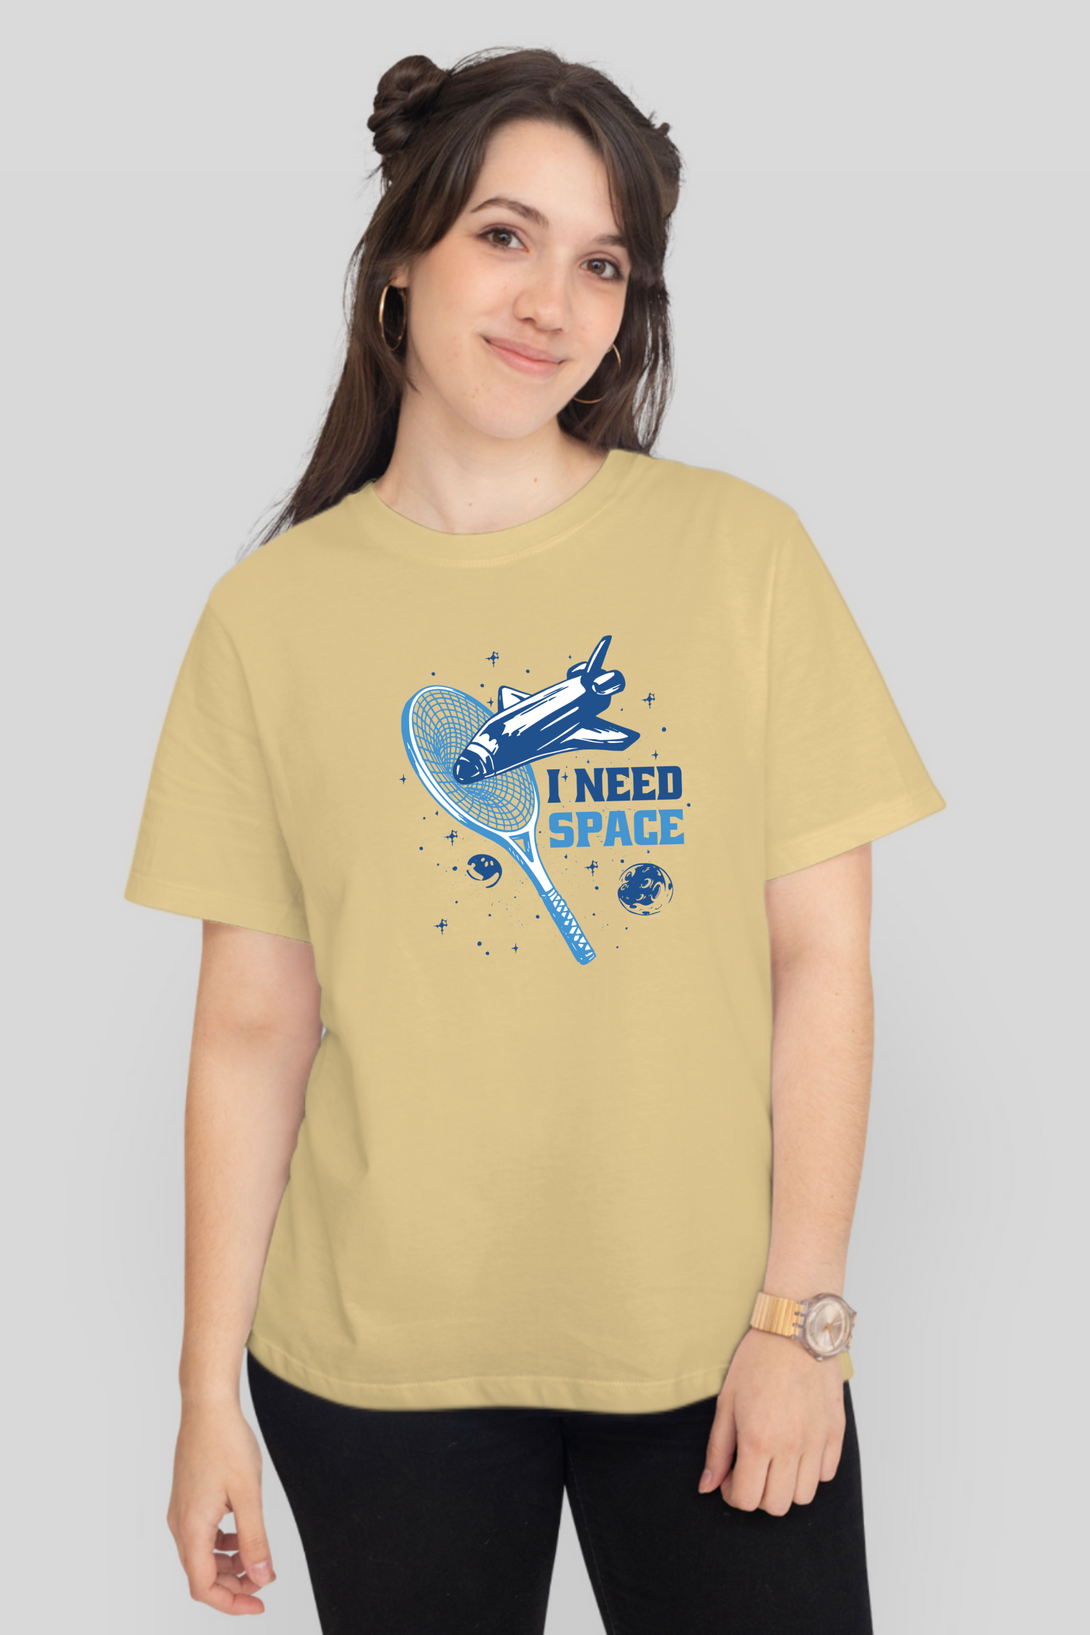 I Need Space Printed T-Shirt For Women - WowWaves - 9